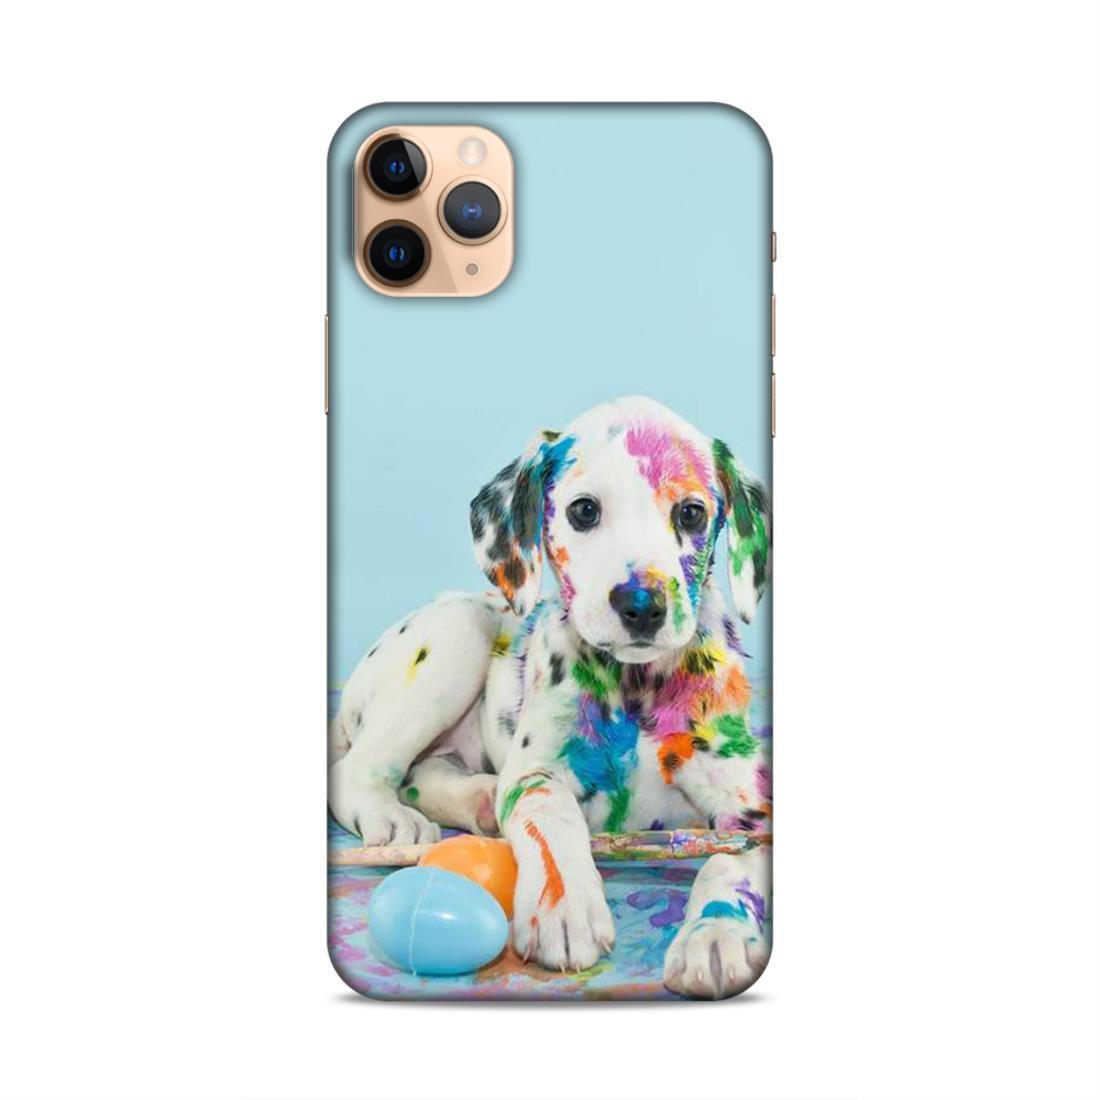 Cute Dog Lover iPhone 11 Pro Mobile Case Cover